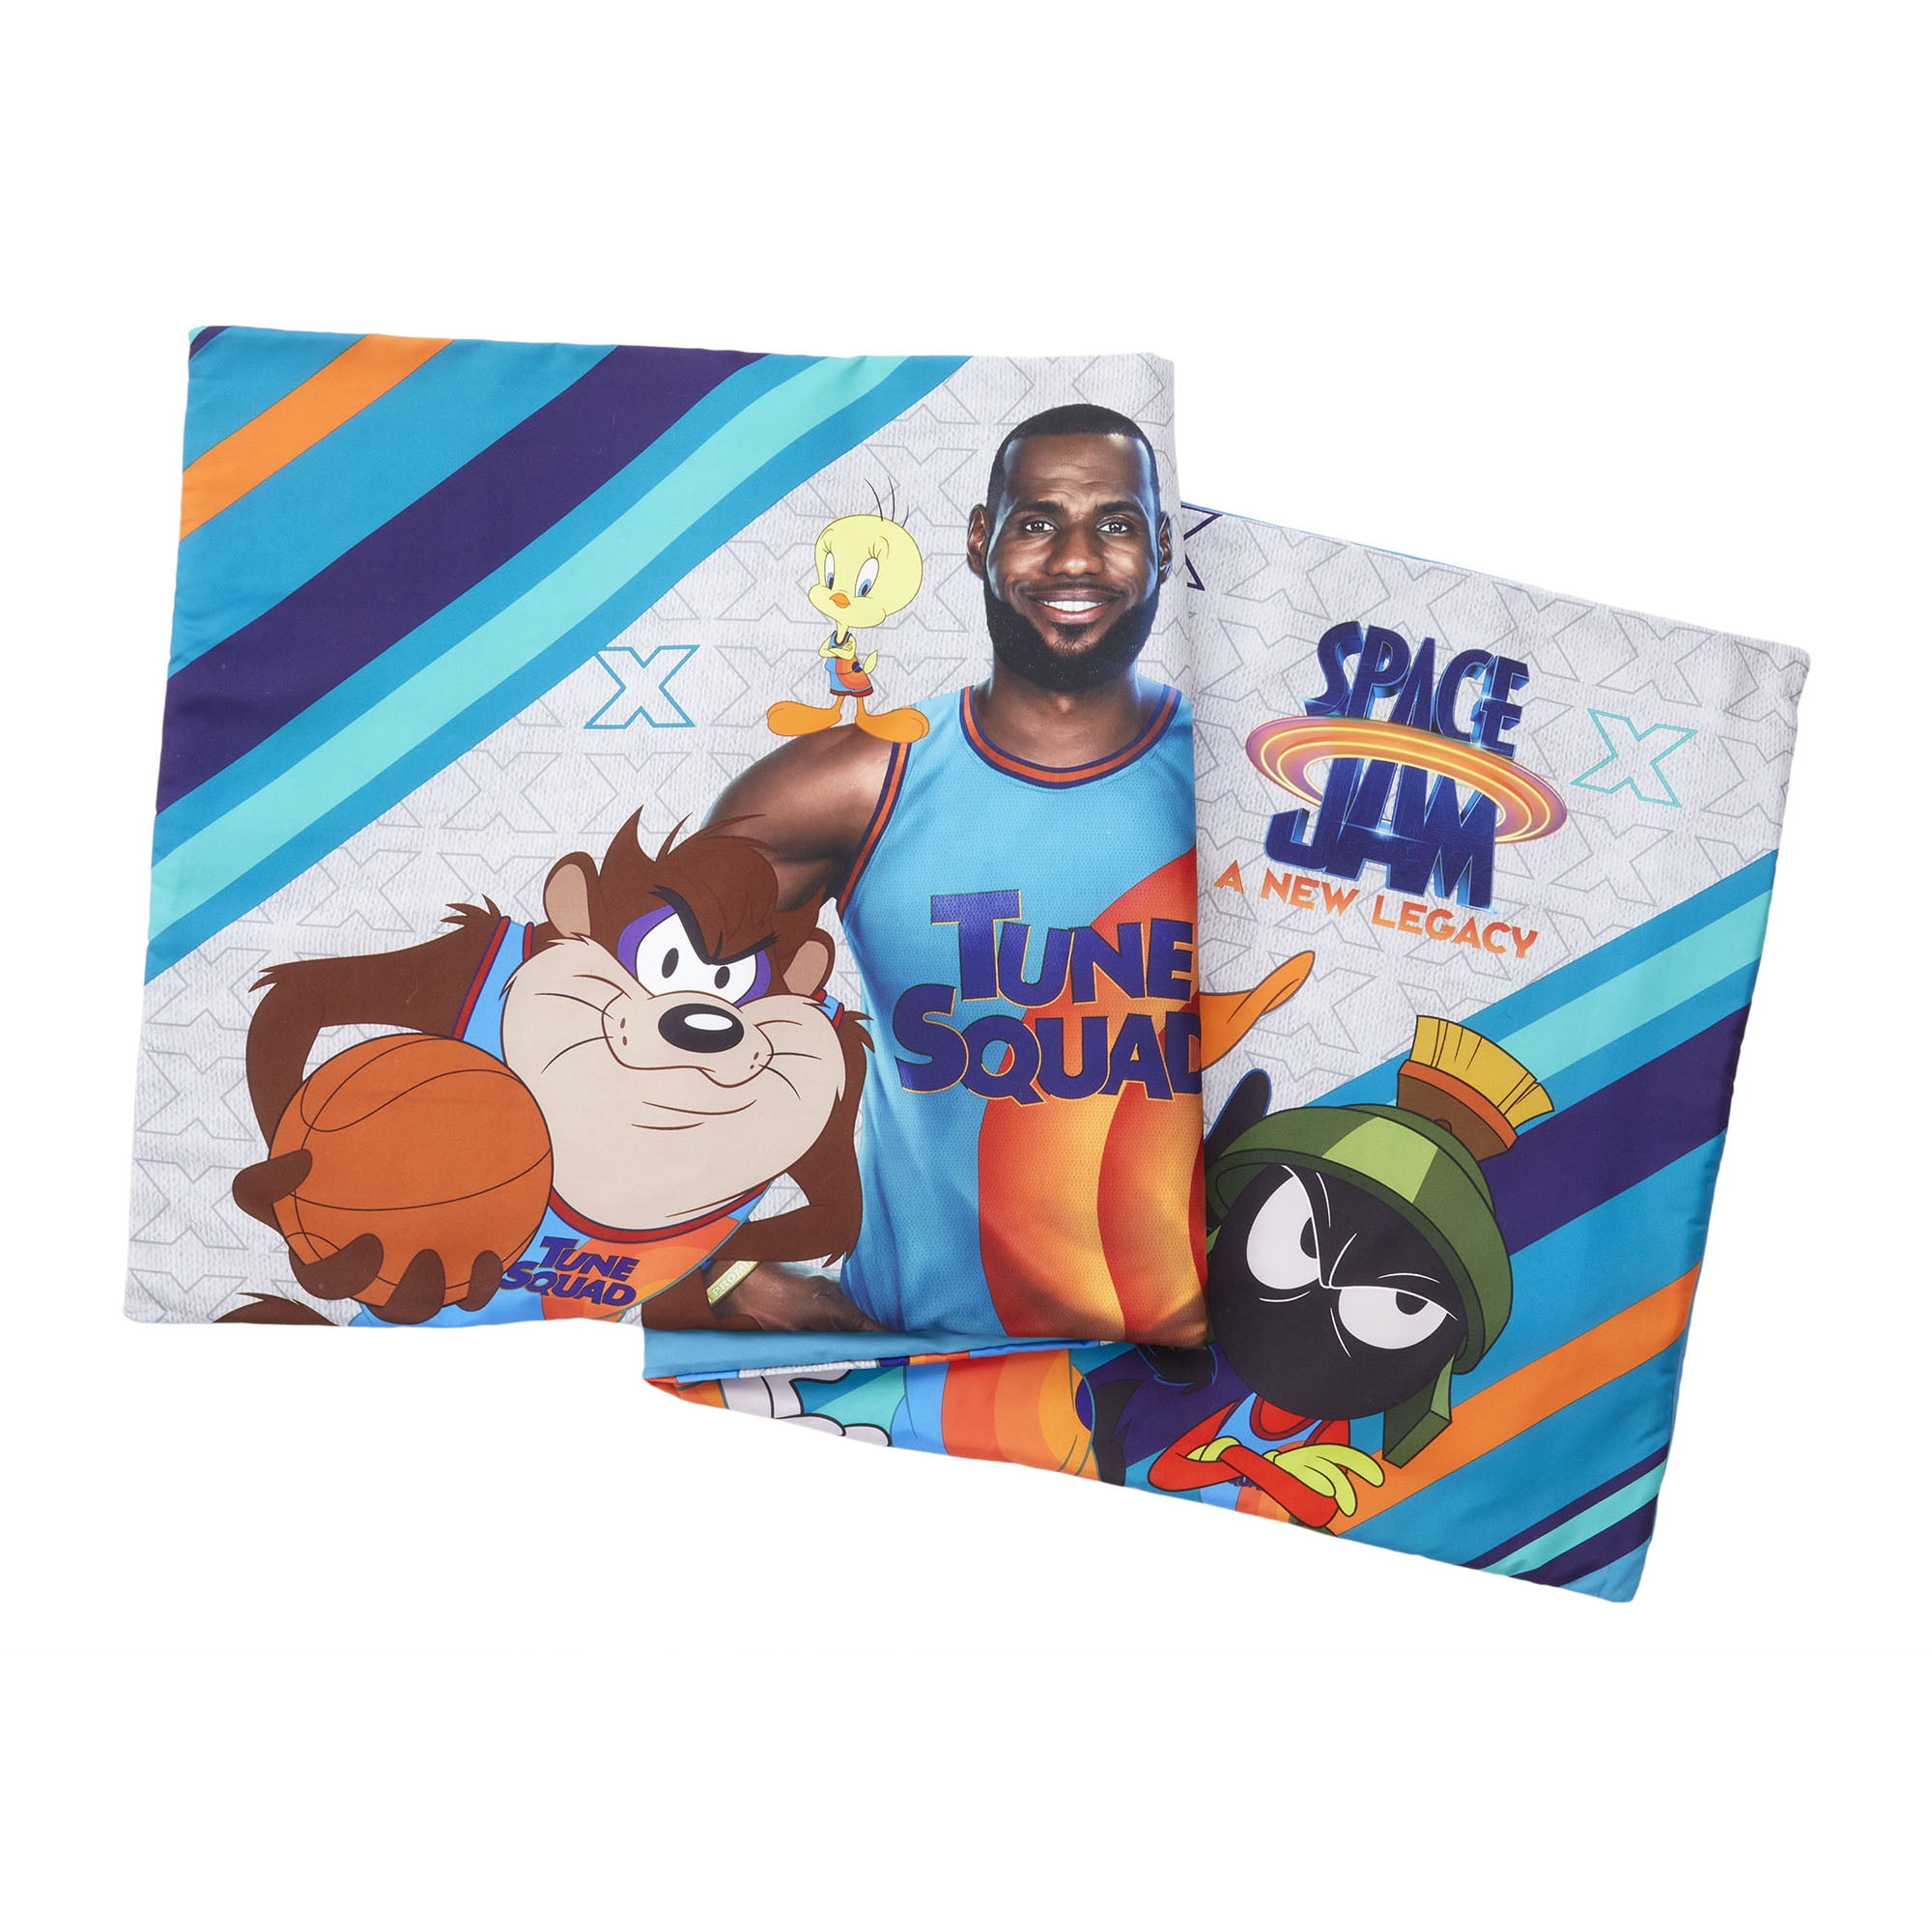 Space Jam Kids Body Pillow Cover with Zipper Closure, Gray and Blue, Warner Bros